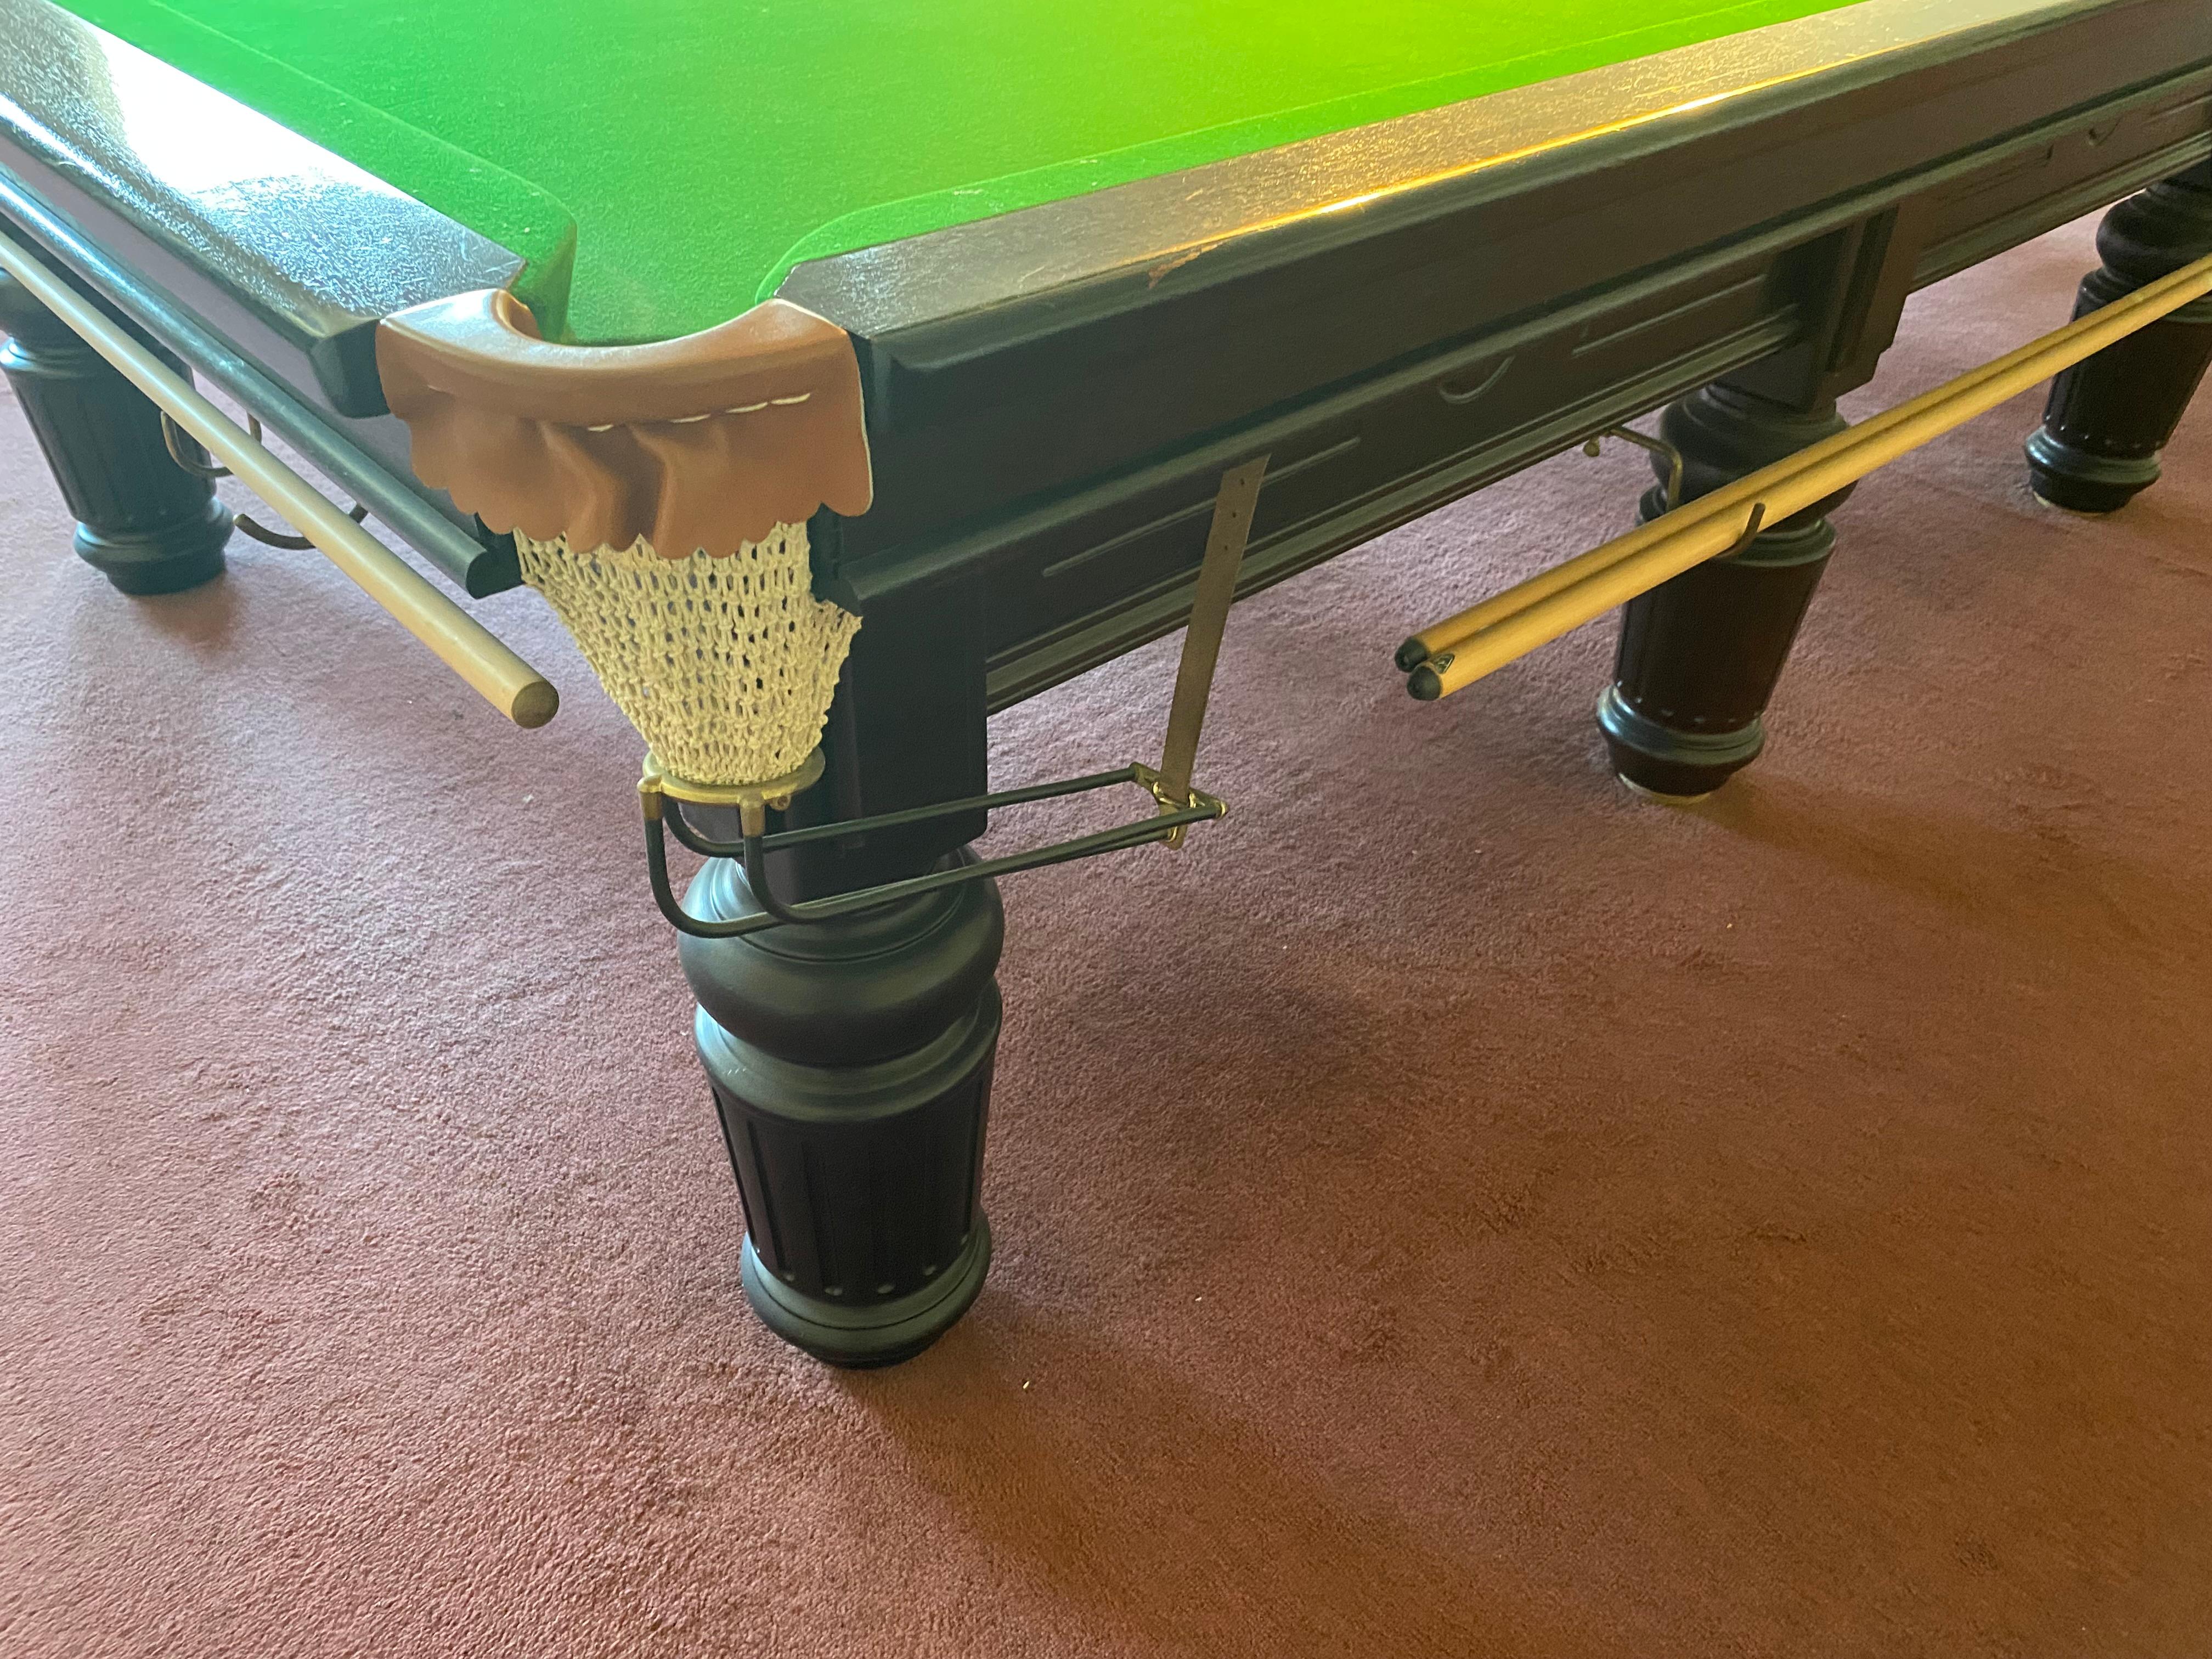 Own the ultimate gaming experience with this full-size snooker/billiards table originally supplied by  Hubble & Freeman  of Maidstone, England. Crafted with precision and care, this table is the perfect addition to any game room or entertainment